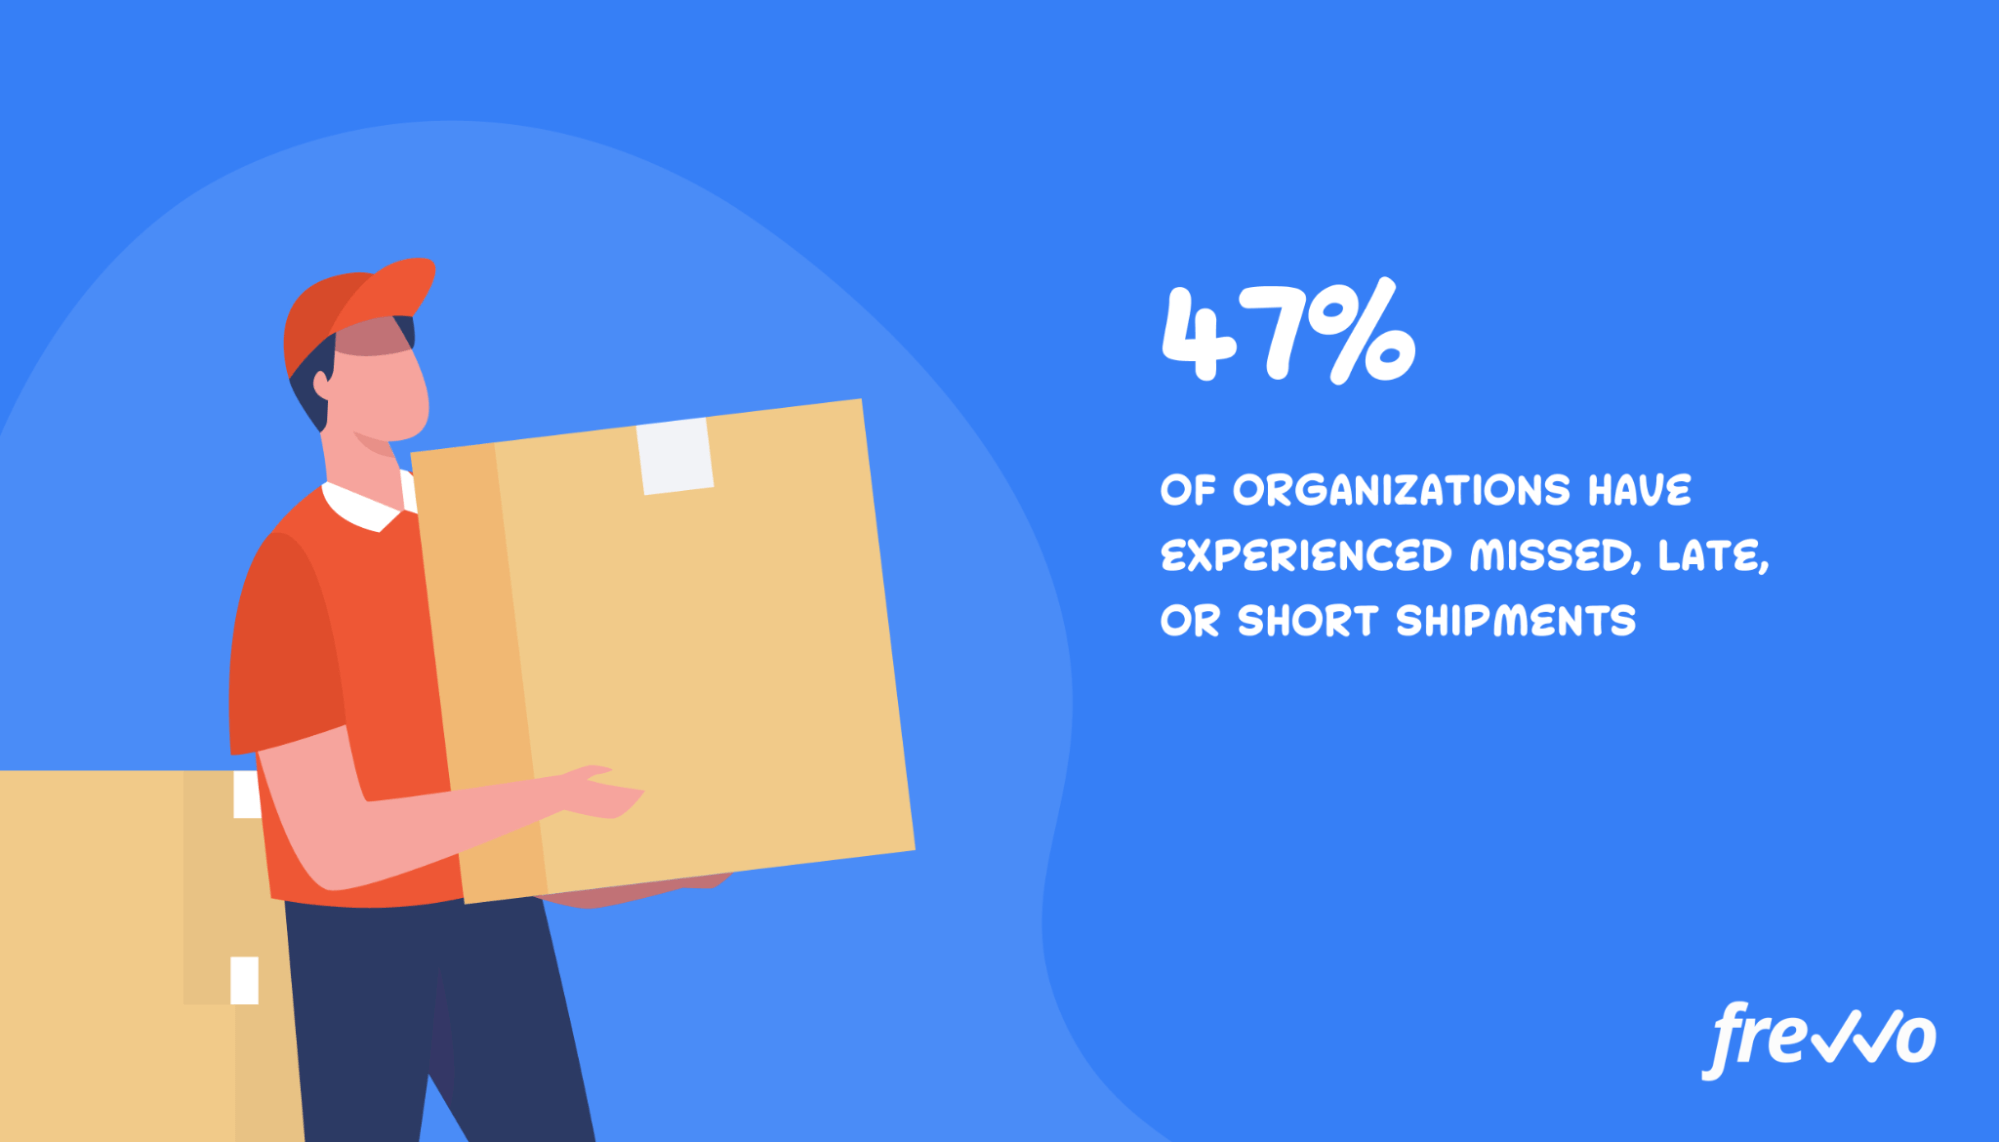 47% of organizations have experienced shipment problems.